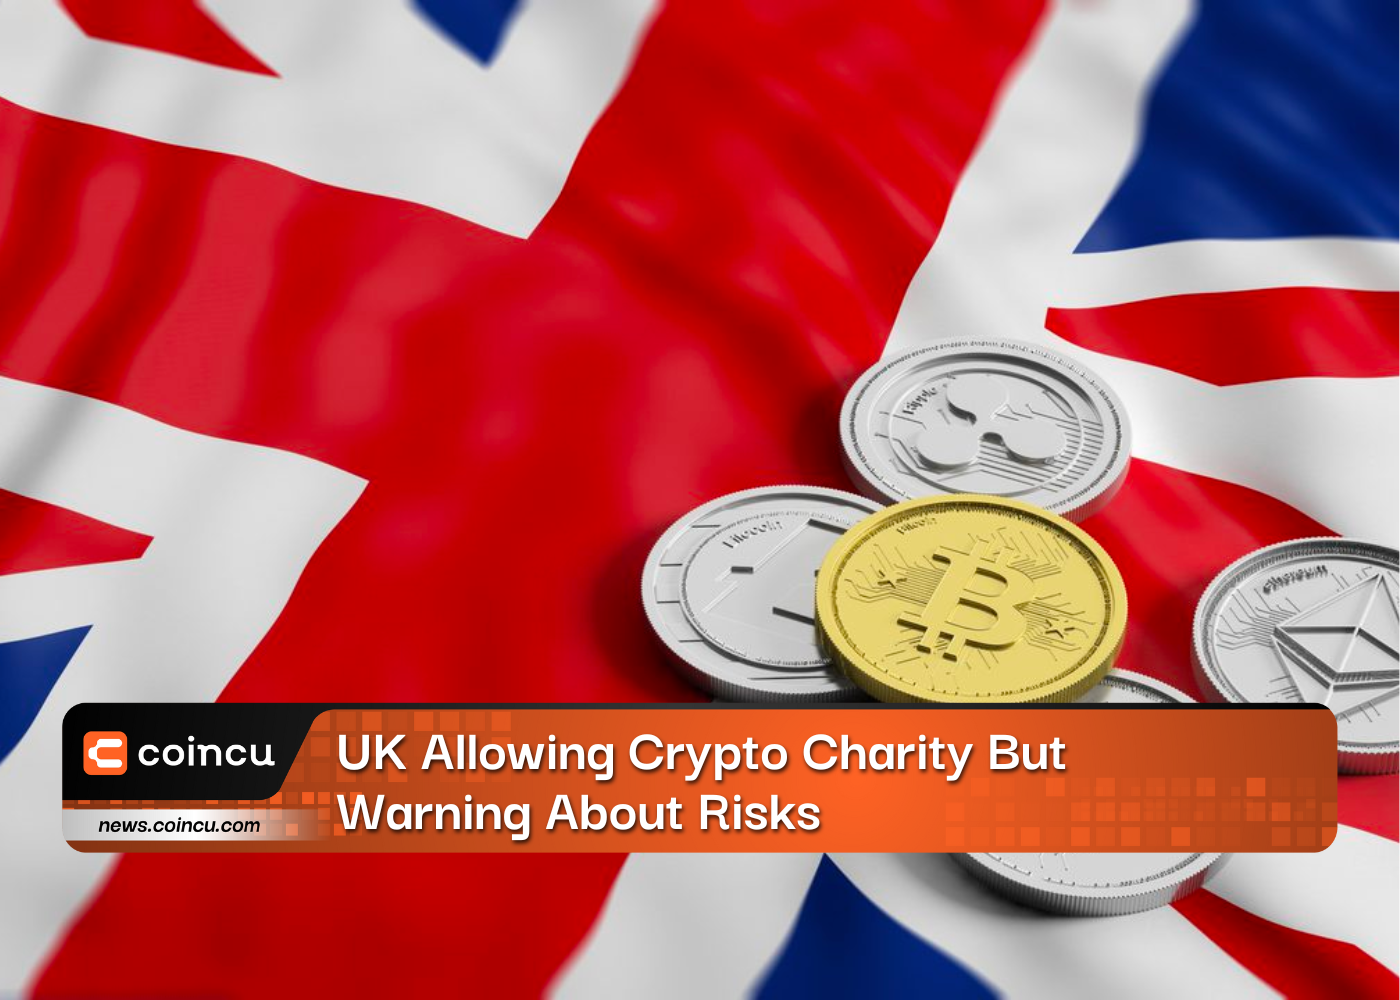 UK Allowing Crypto Charity But Warning About Risks